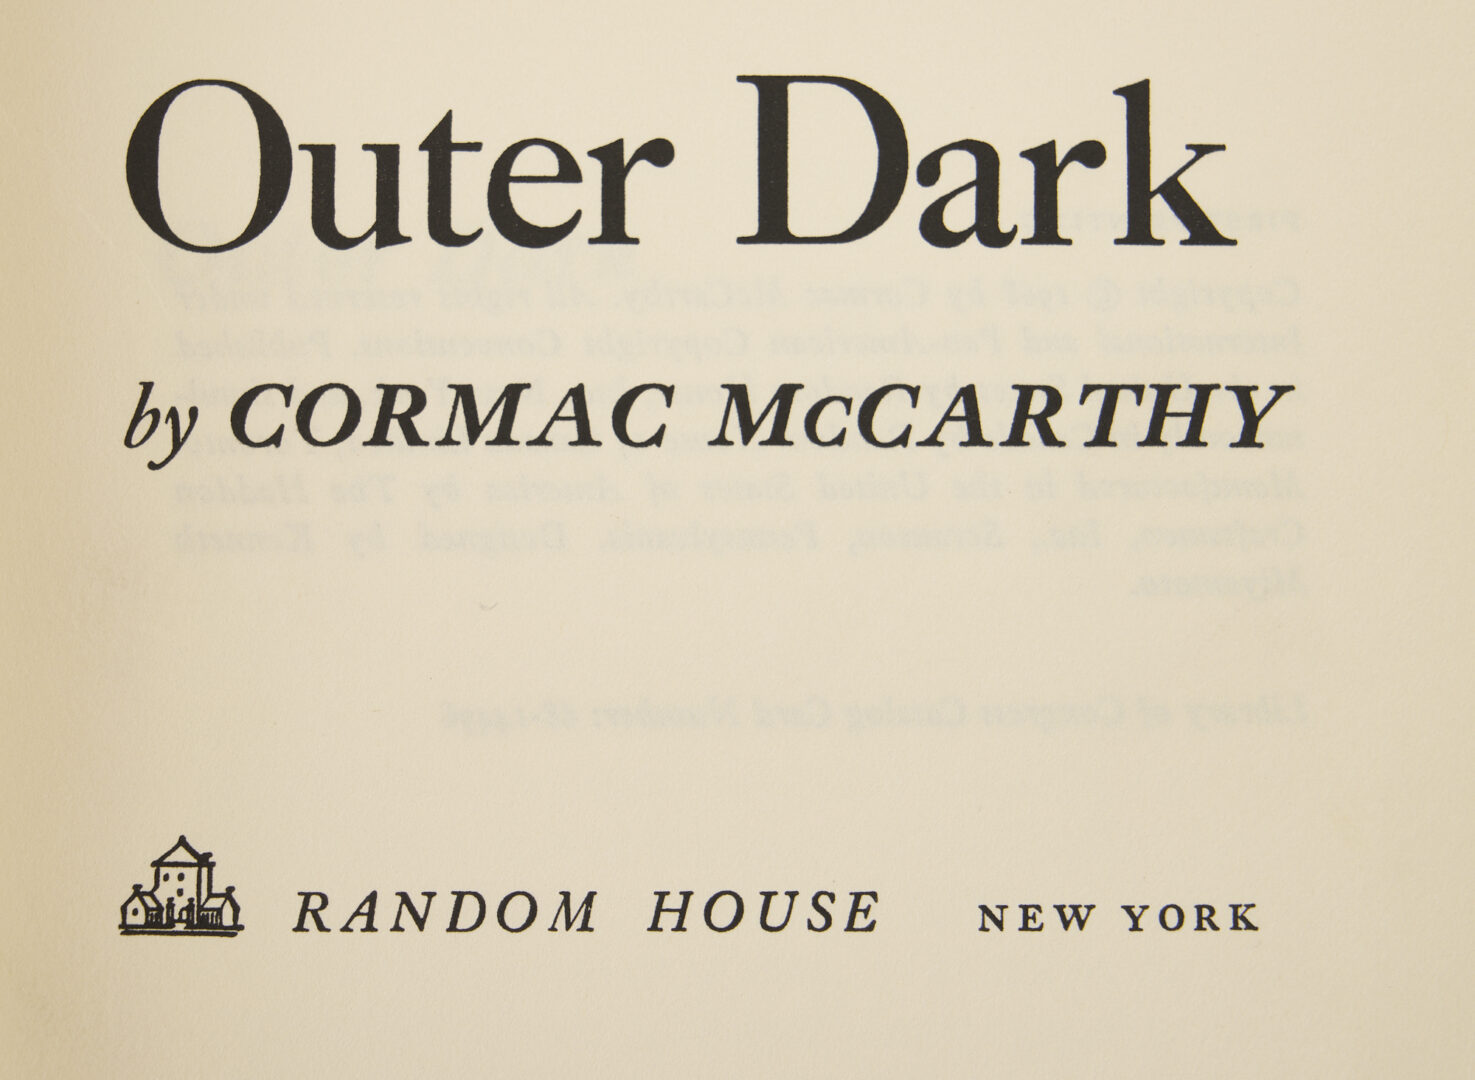 Lot 582: Cormac McCarthy, Outer Dark, 1st Edition, Signed